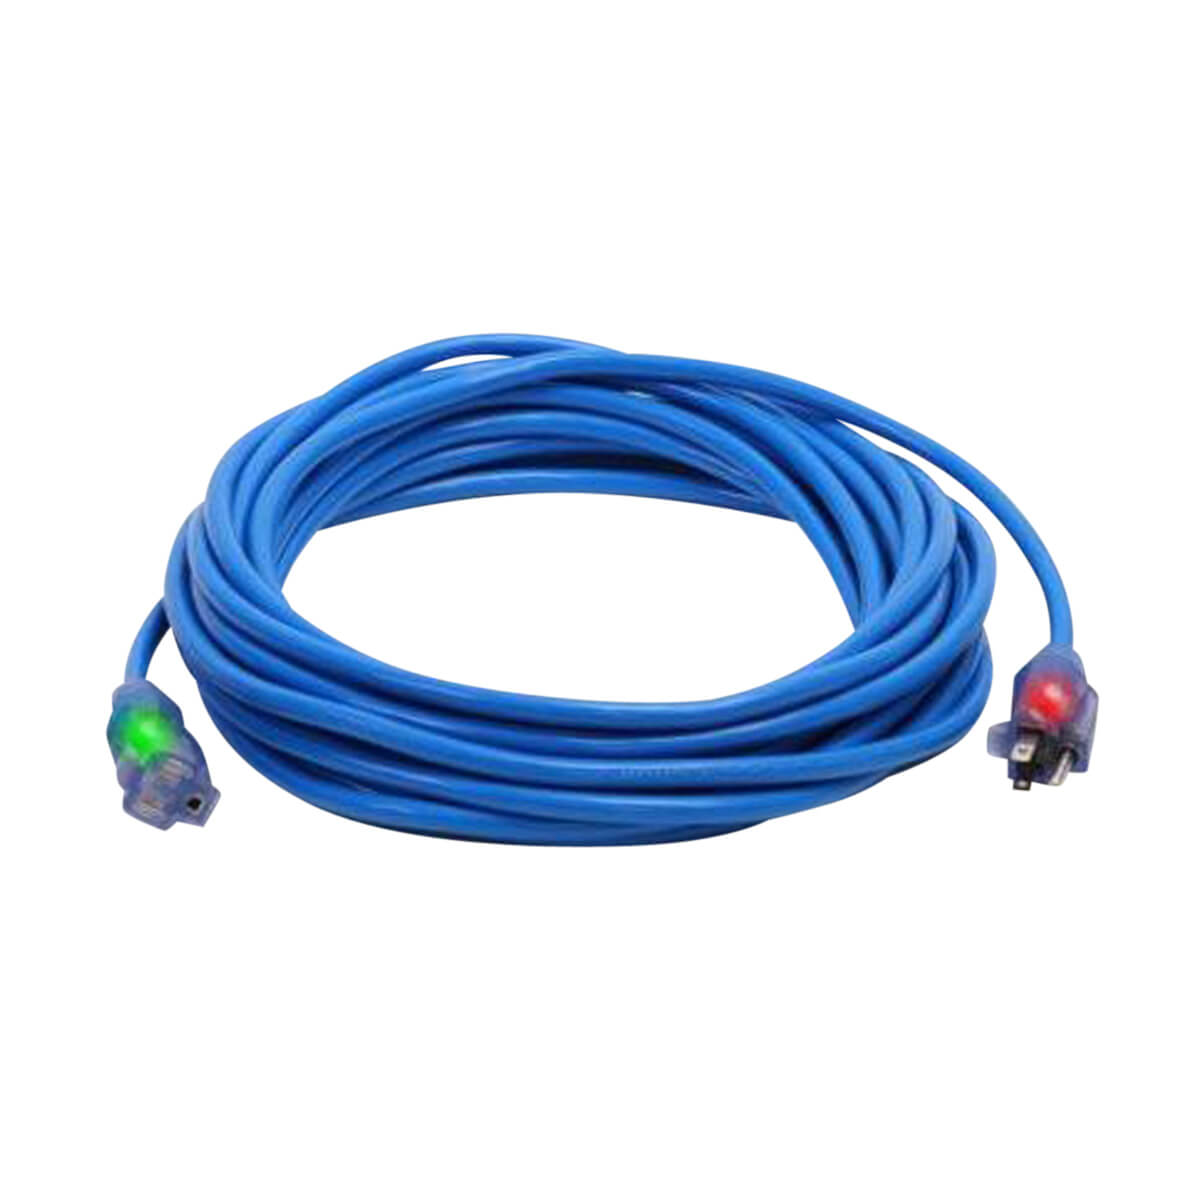 Pro Glo® Extension Cord 100-ft - Blue